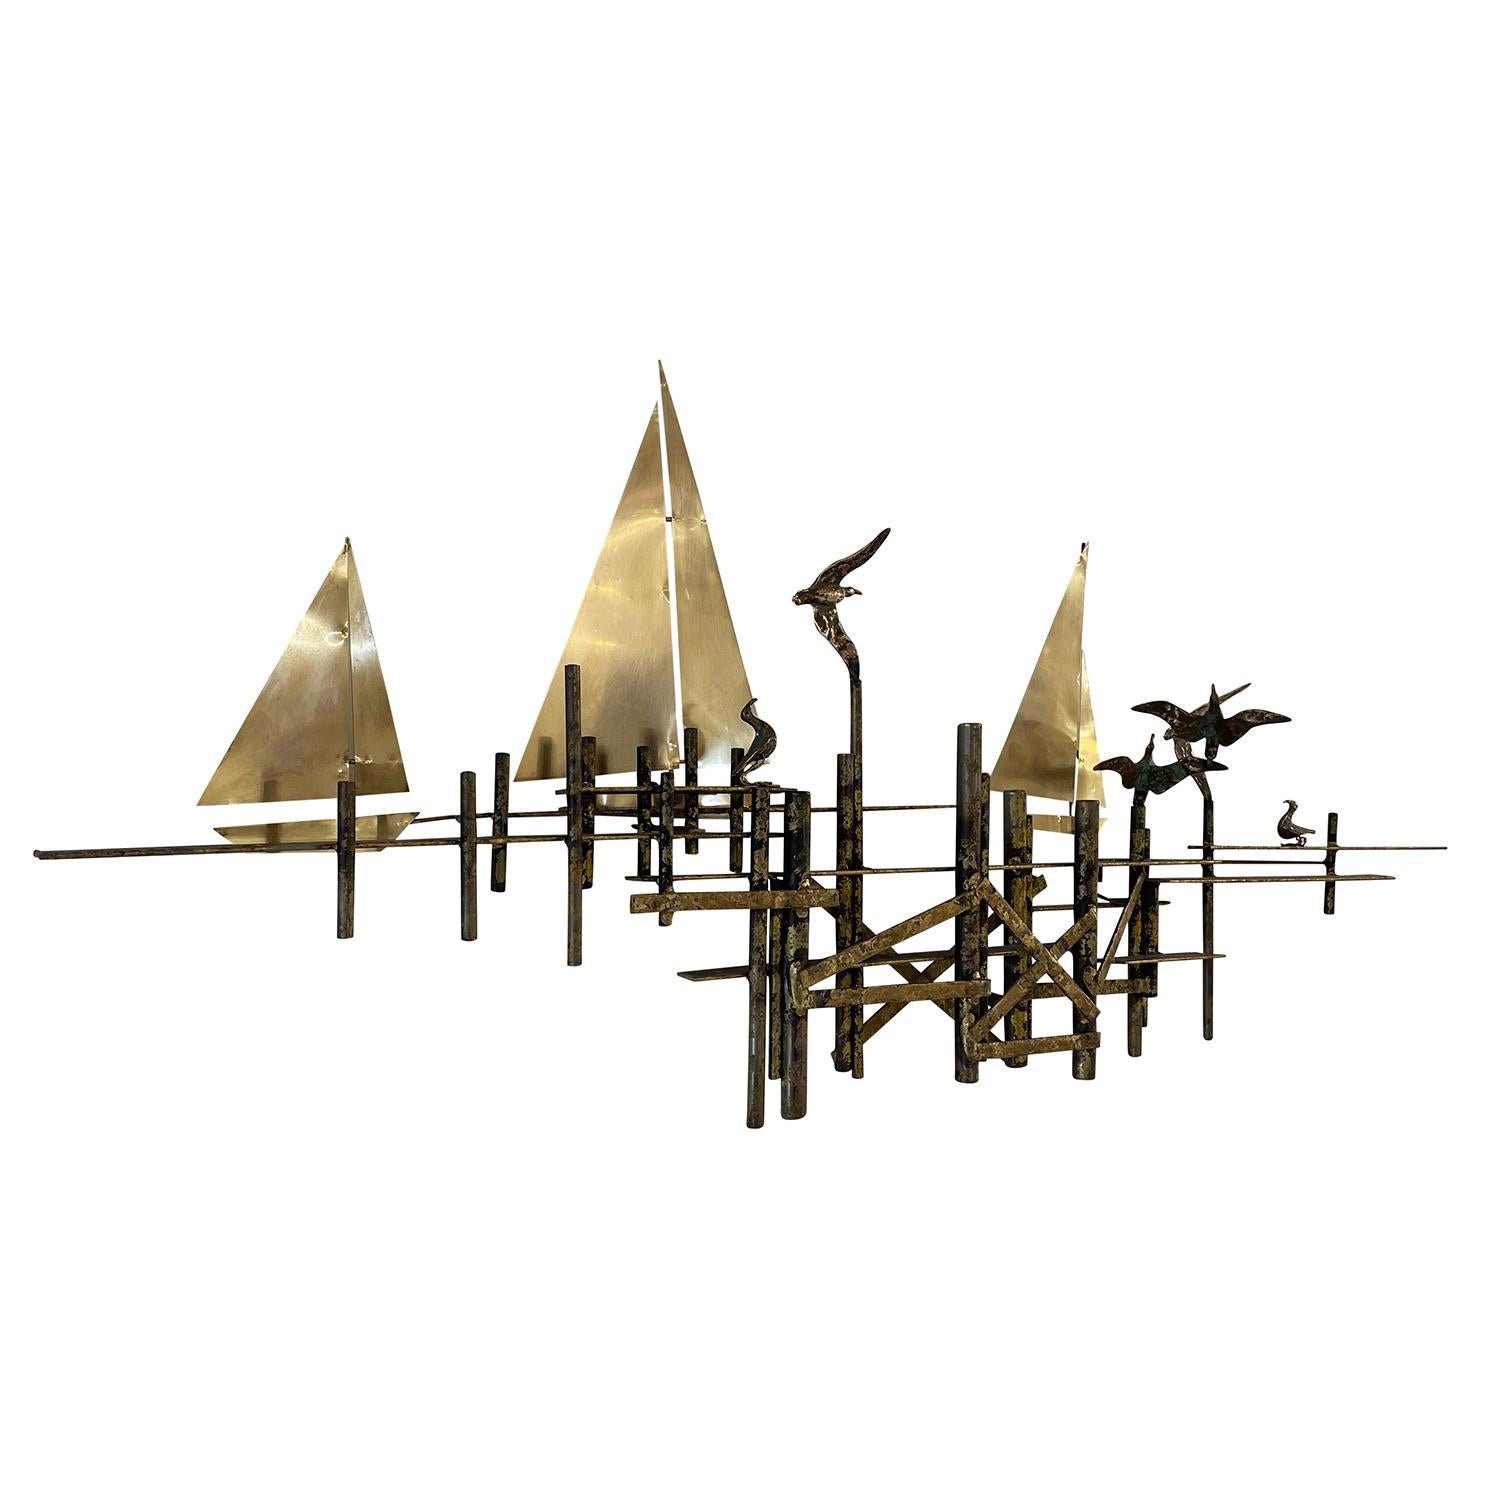 A black-grey, vintage Mid-Century Modern American abstract Brutalist wall sculpture made of hand crafted gilded metal, designed and produced by Curtis Jere in good condition. The detailed wall décor piece depicts three sailboats and shorebirds at